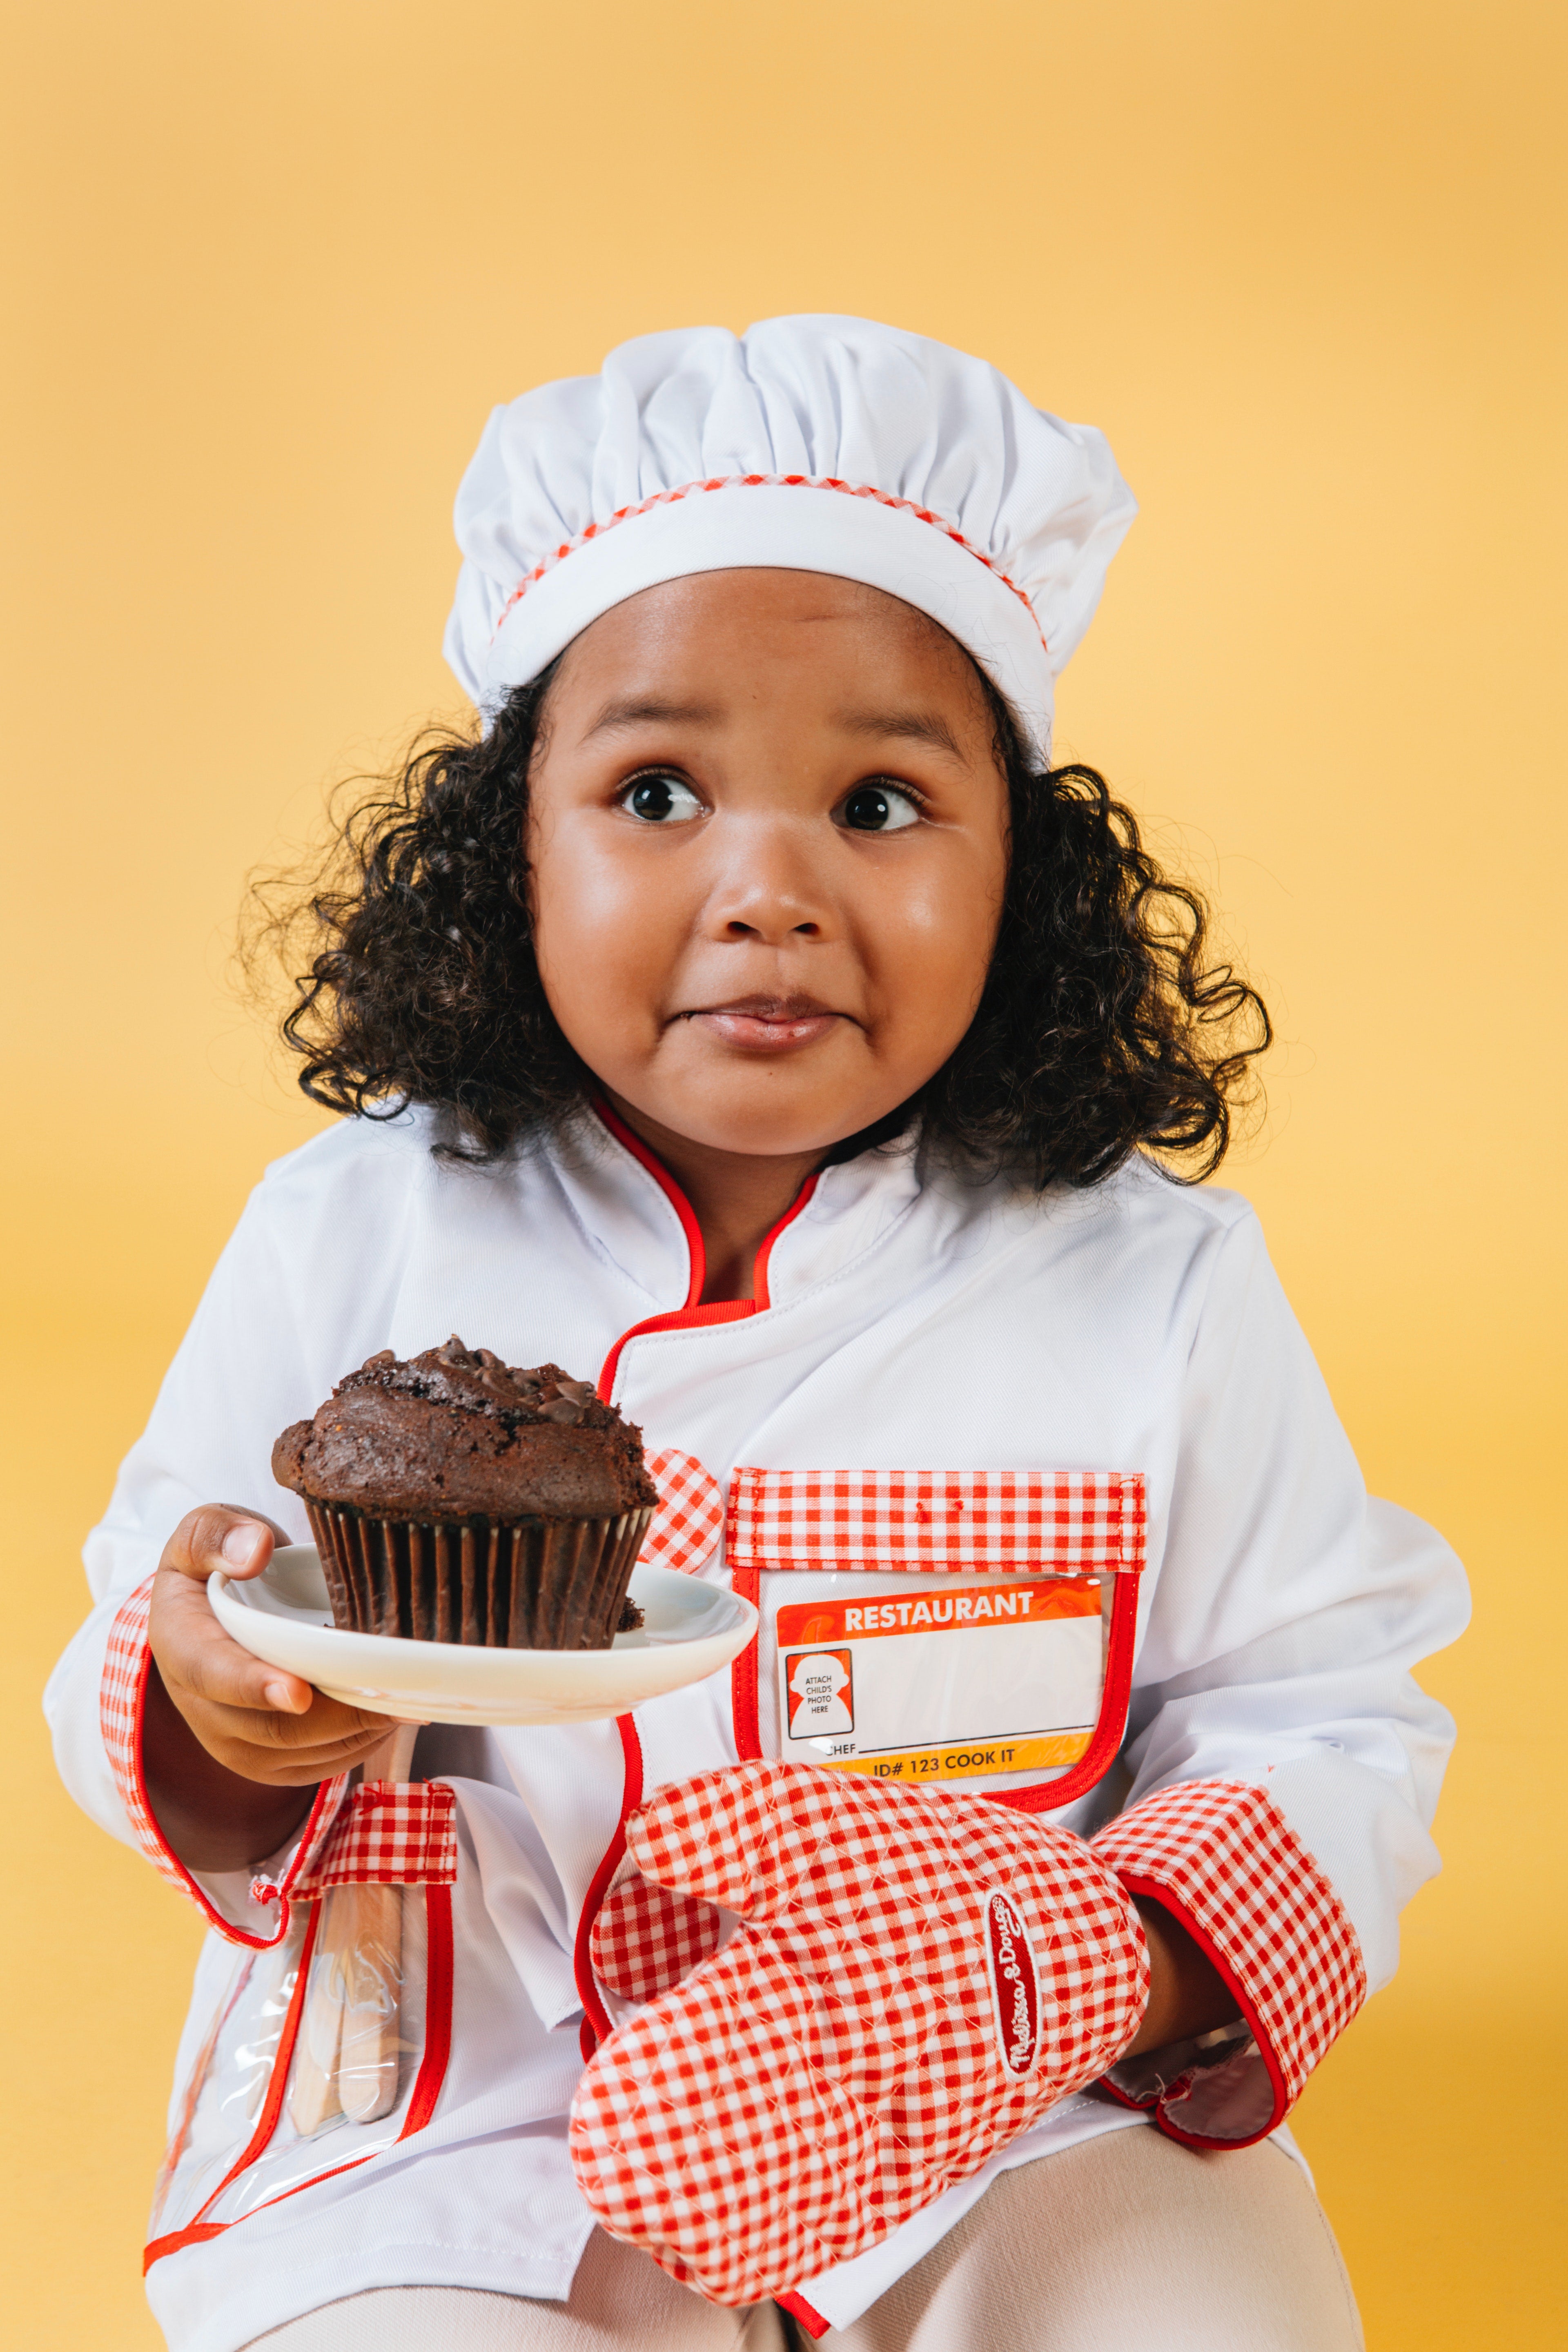 A girl in a chef's costume holds a plate with a cupcake